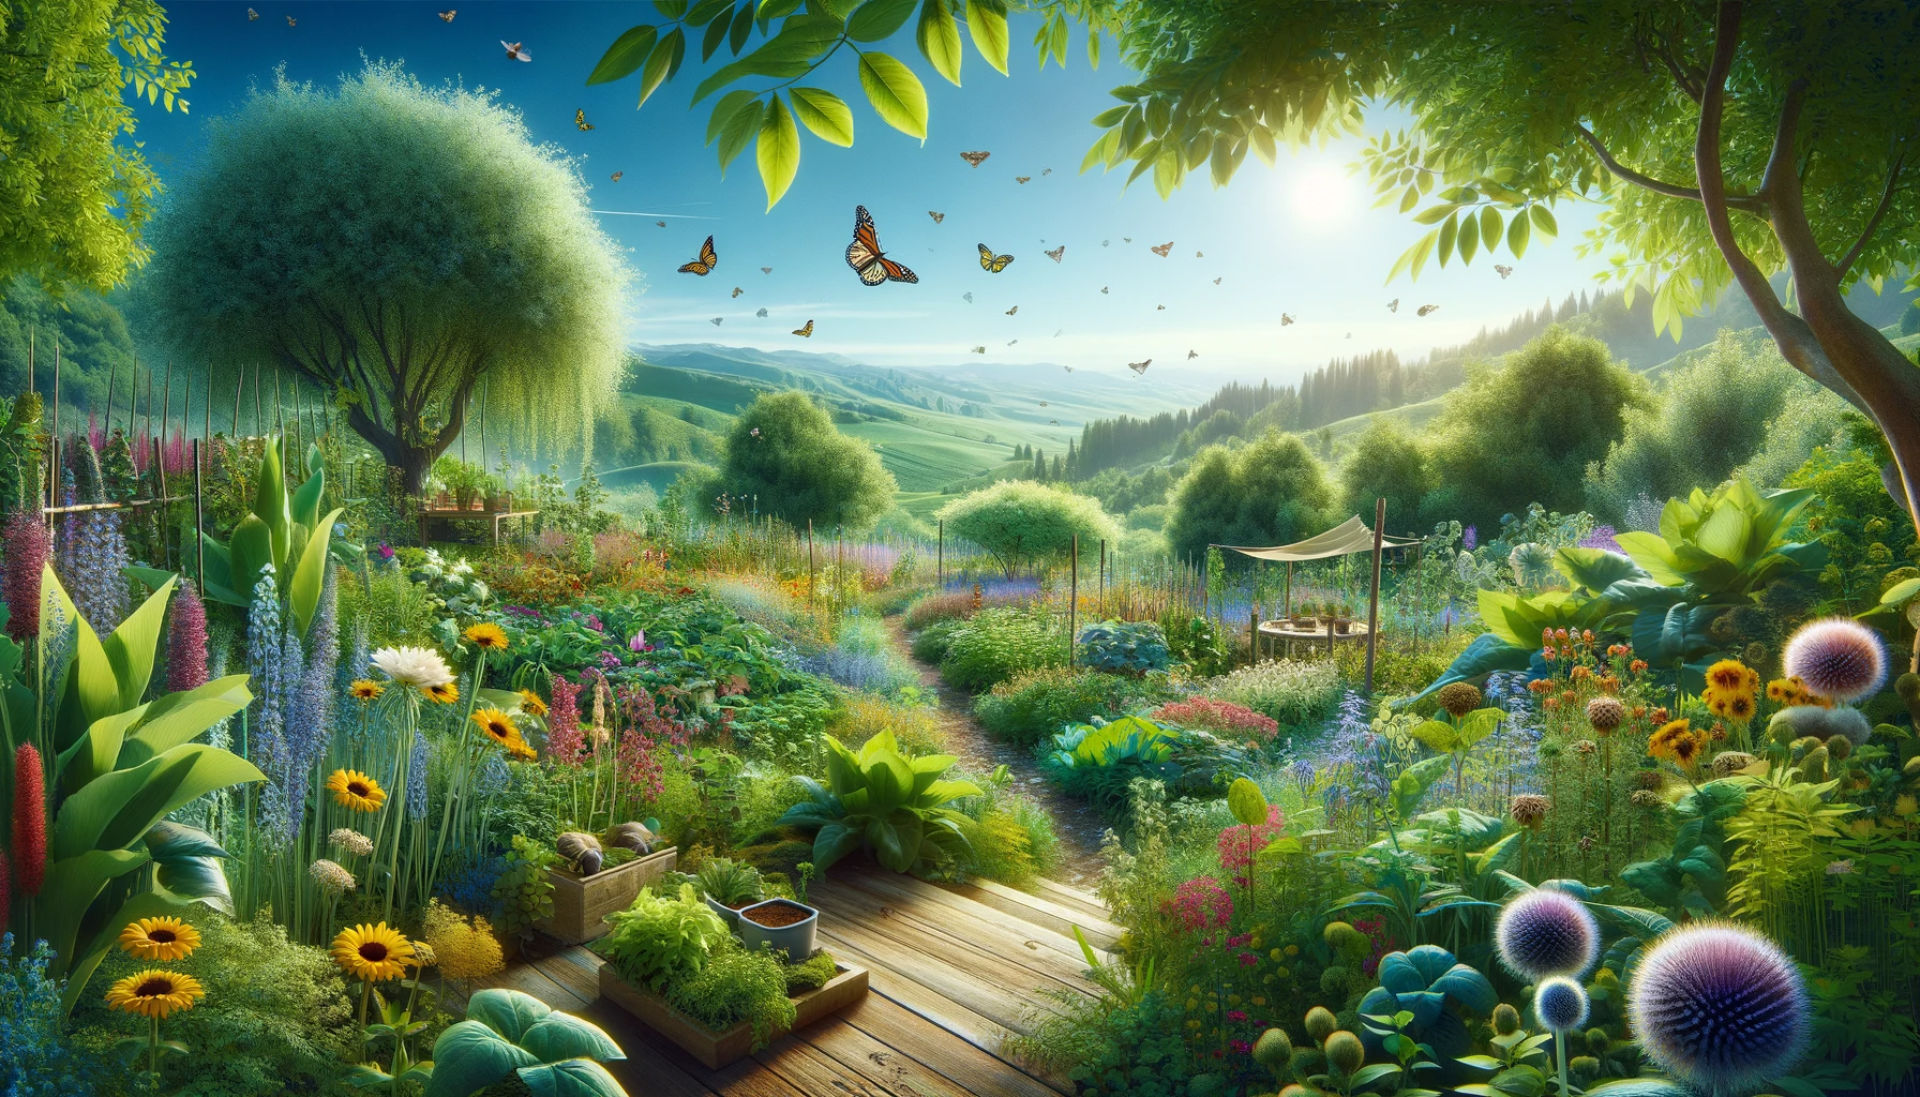 The Benefits of Biodynamic Gardening: The third image displays a lush and thriving biodynamic garden, illustrating the biodiversity and balance achieved through these methods. This scene embodies the benefits of biodynamic gardening, highlighting its positive impact on the ecosystem.